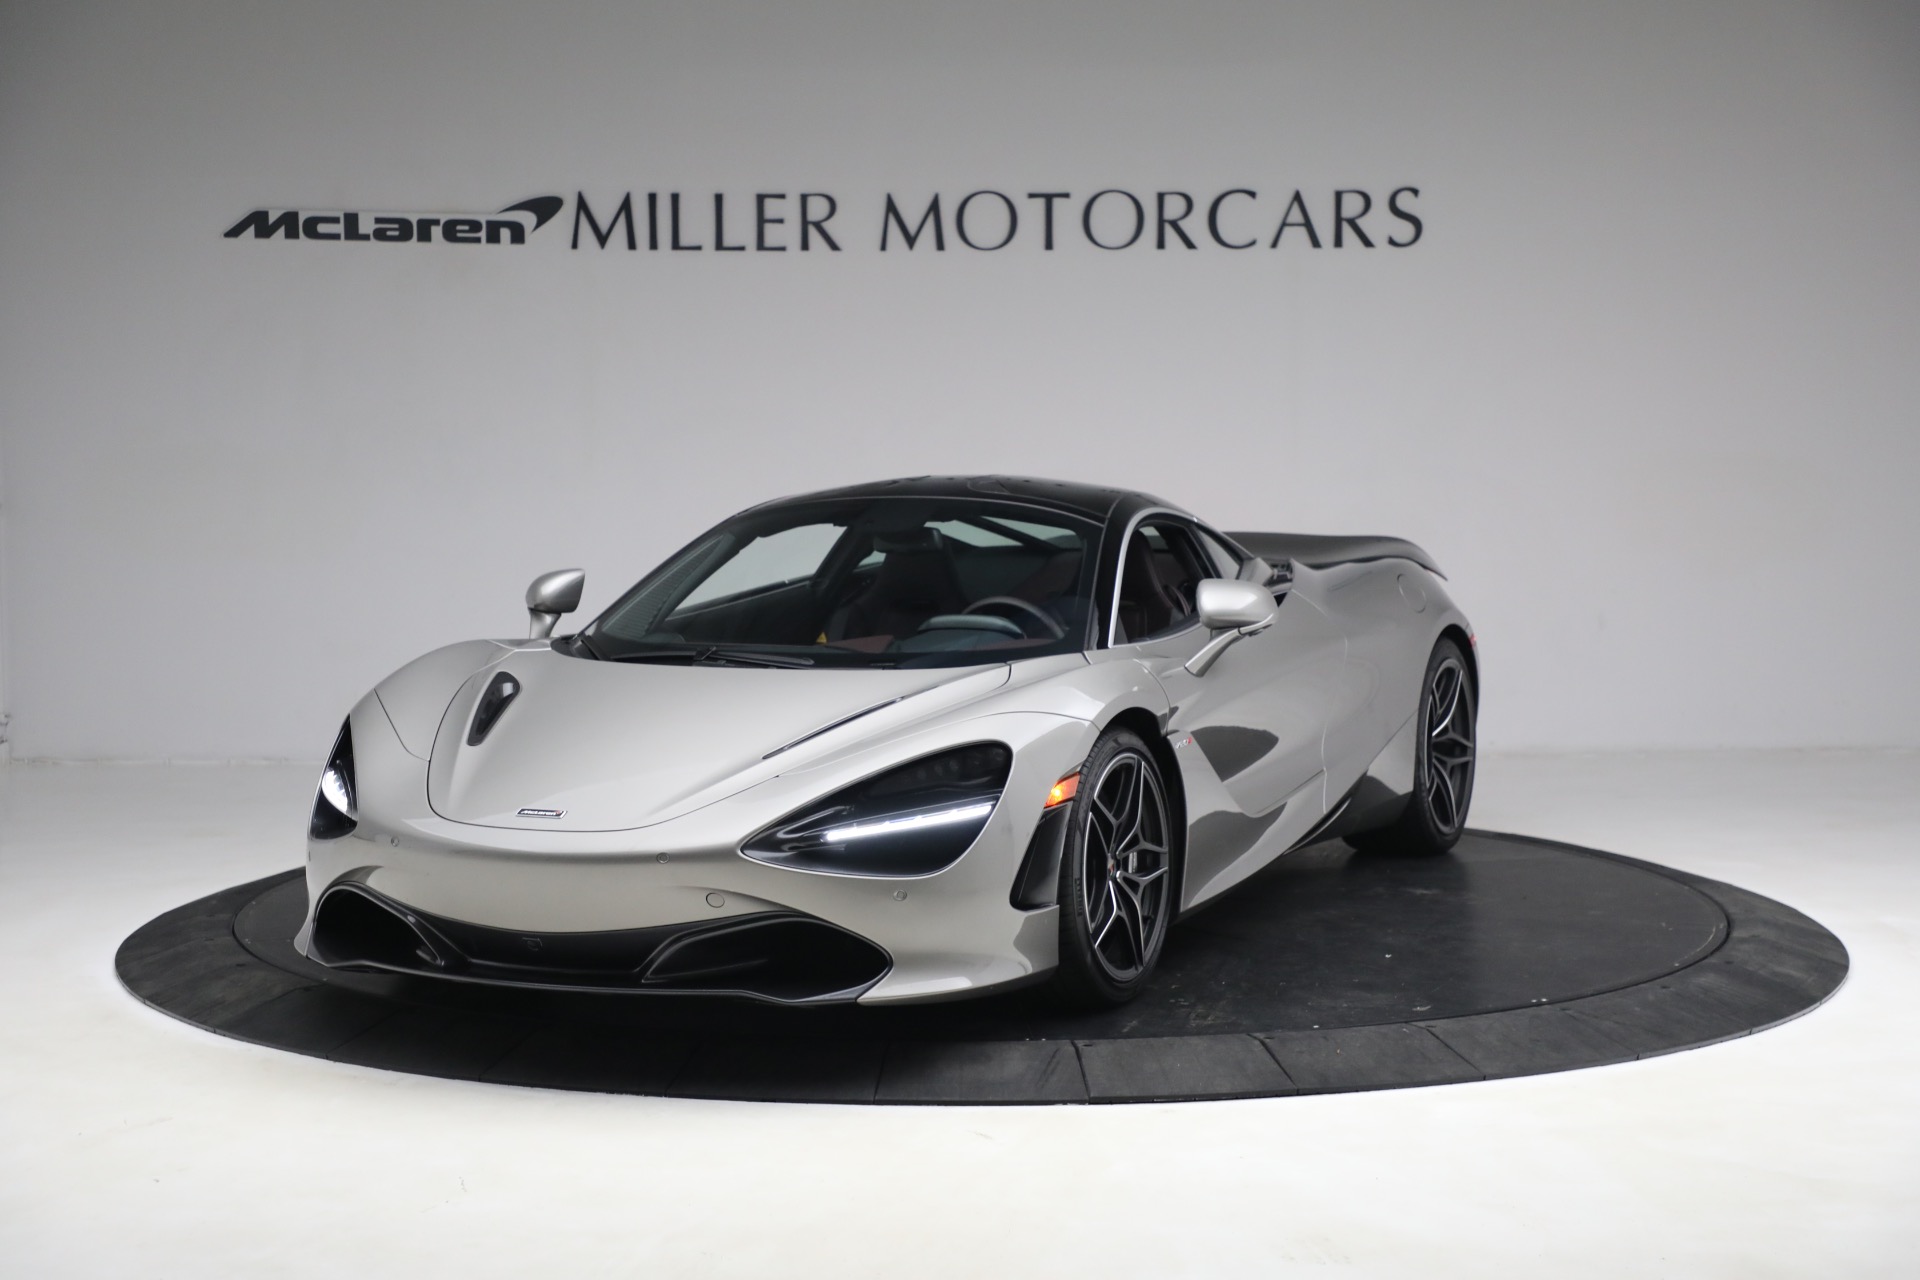 Used 2018 McLaren 720S Luxury for sale $273,900 at Bentley Greenwich in Greenwich CT 06830 1